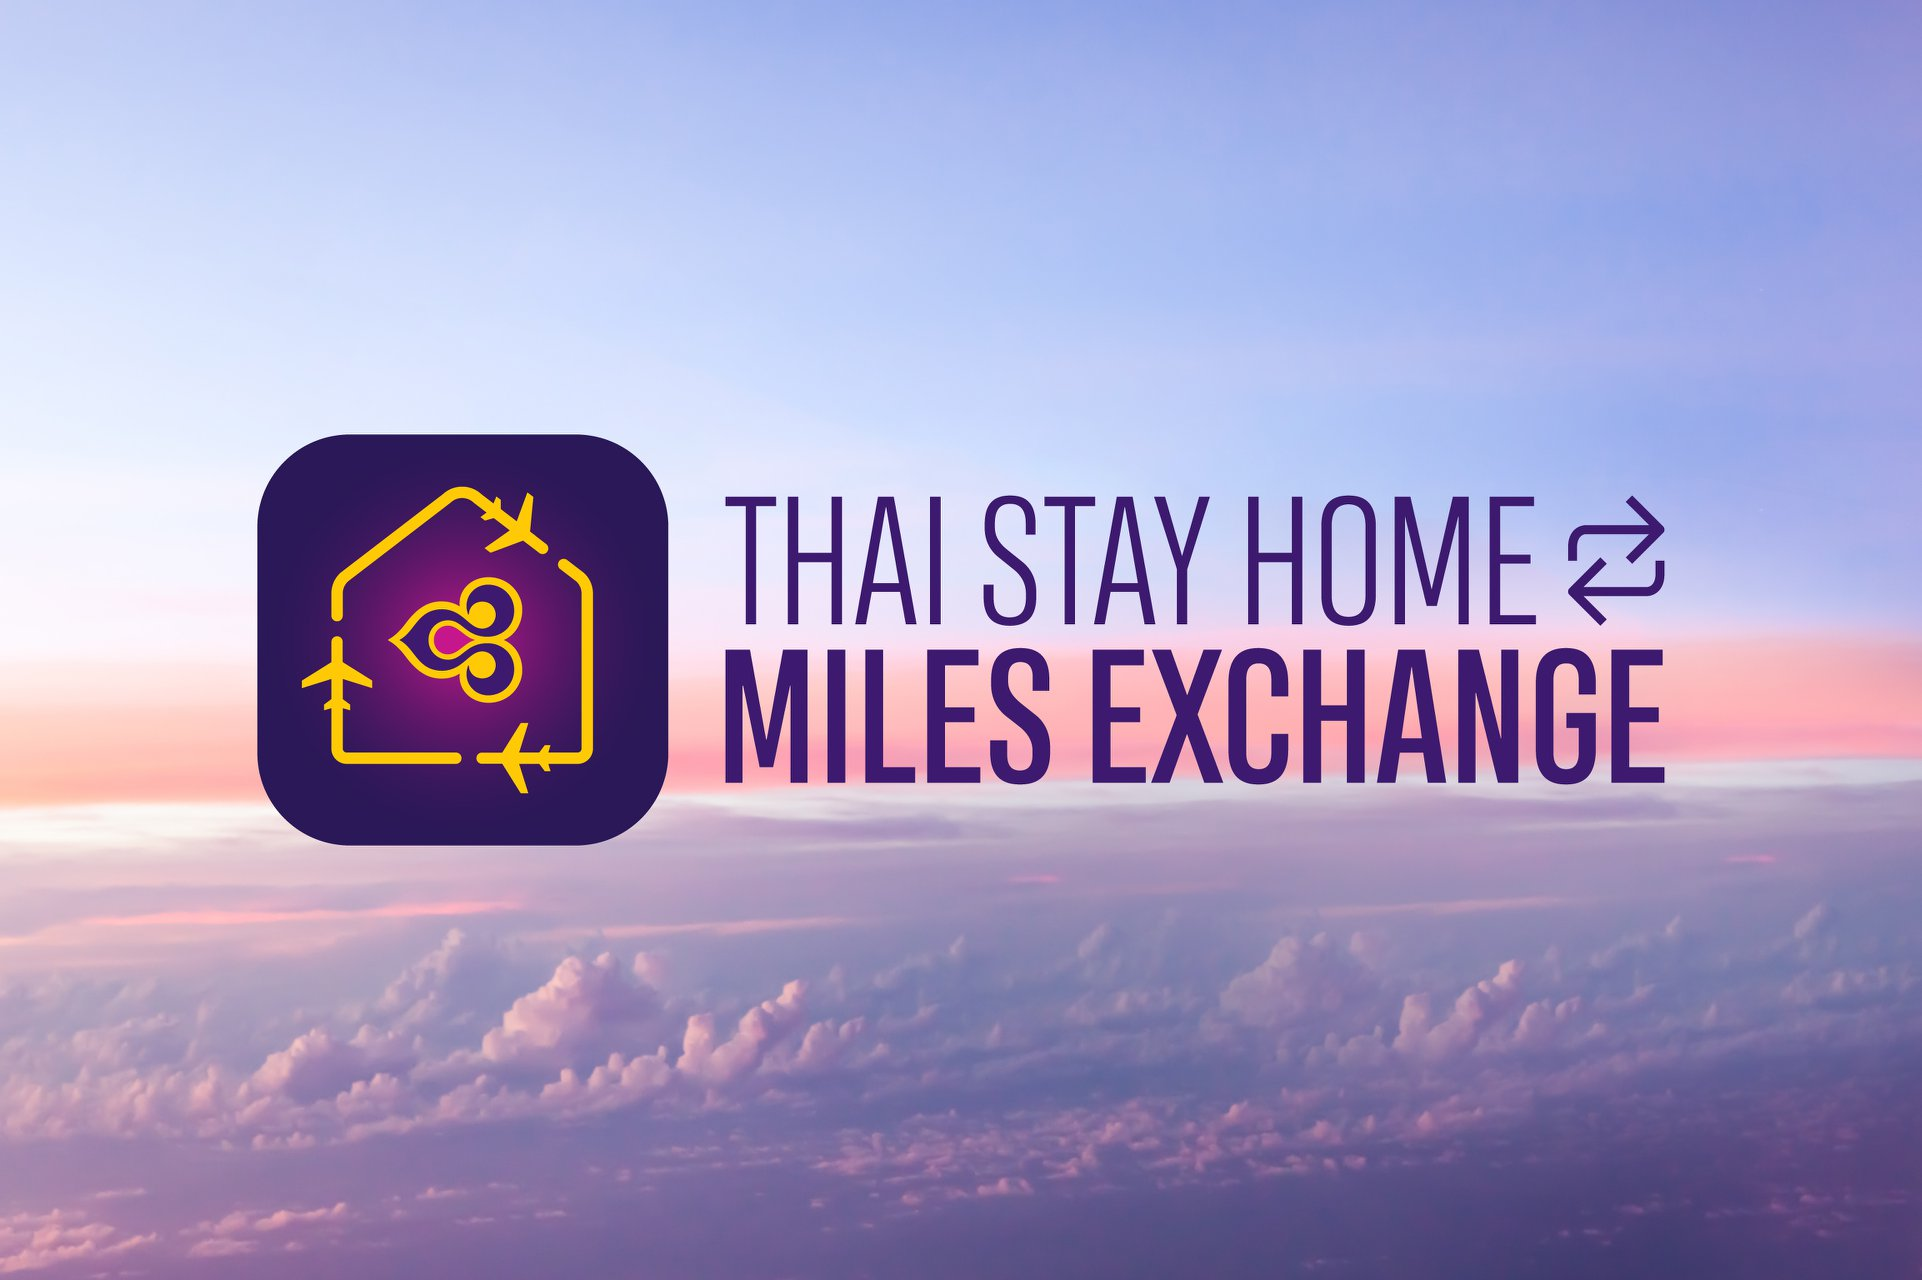 THAI Stay Home Miles Exchange